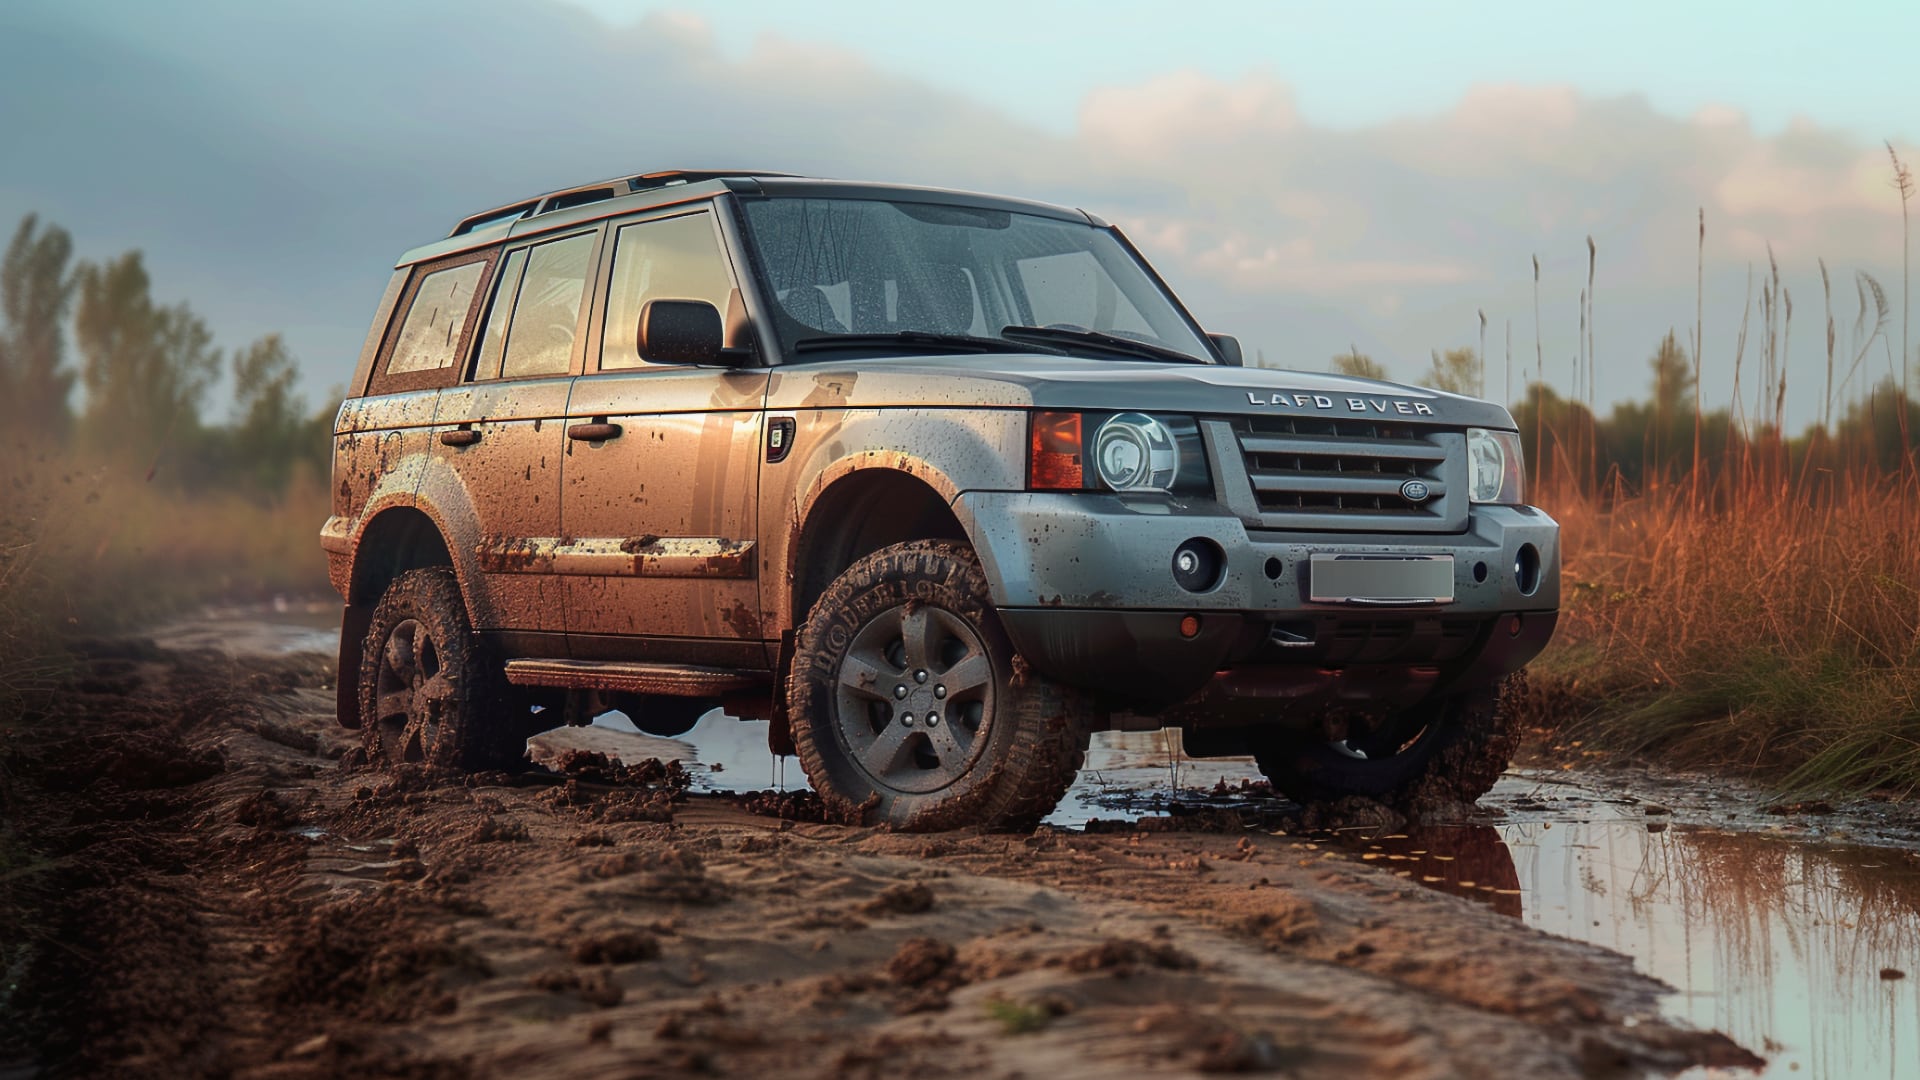 A Land Rover LR3 is driving down a muddy road.